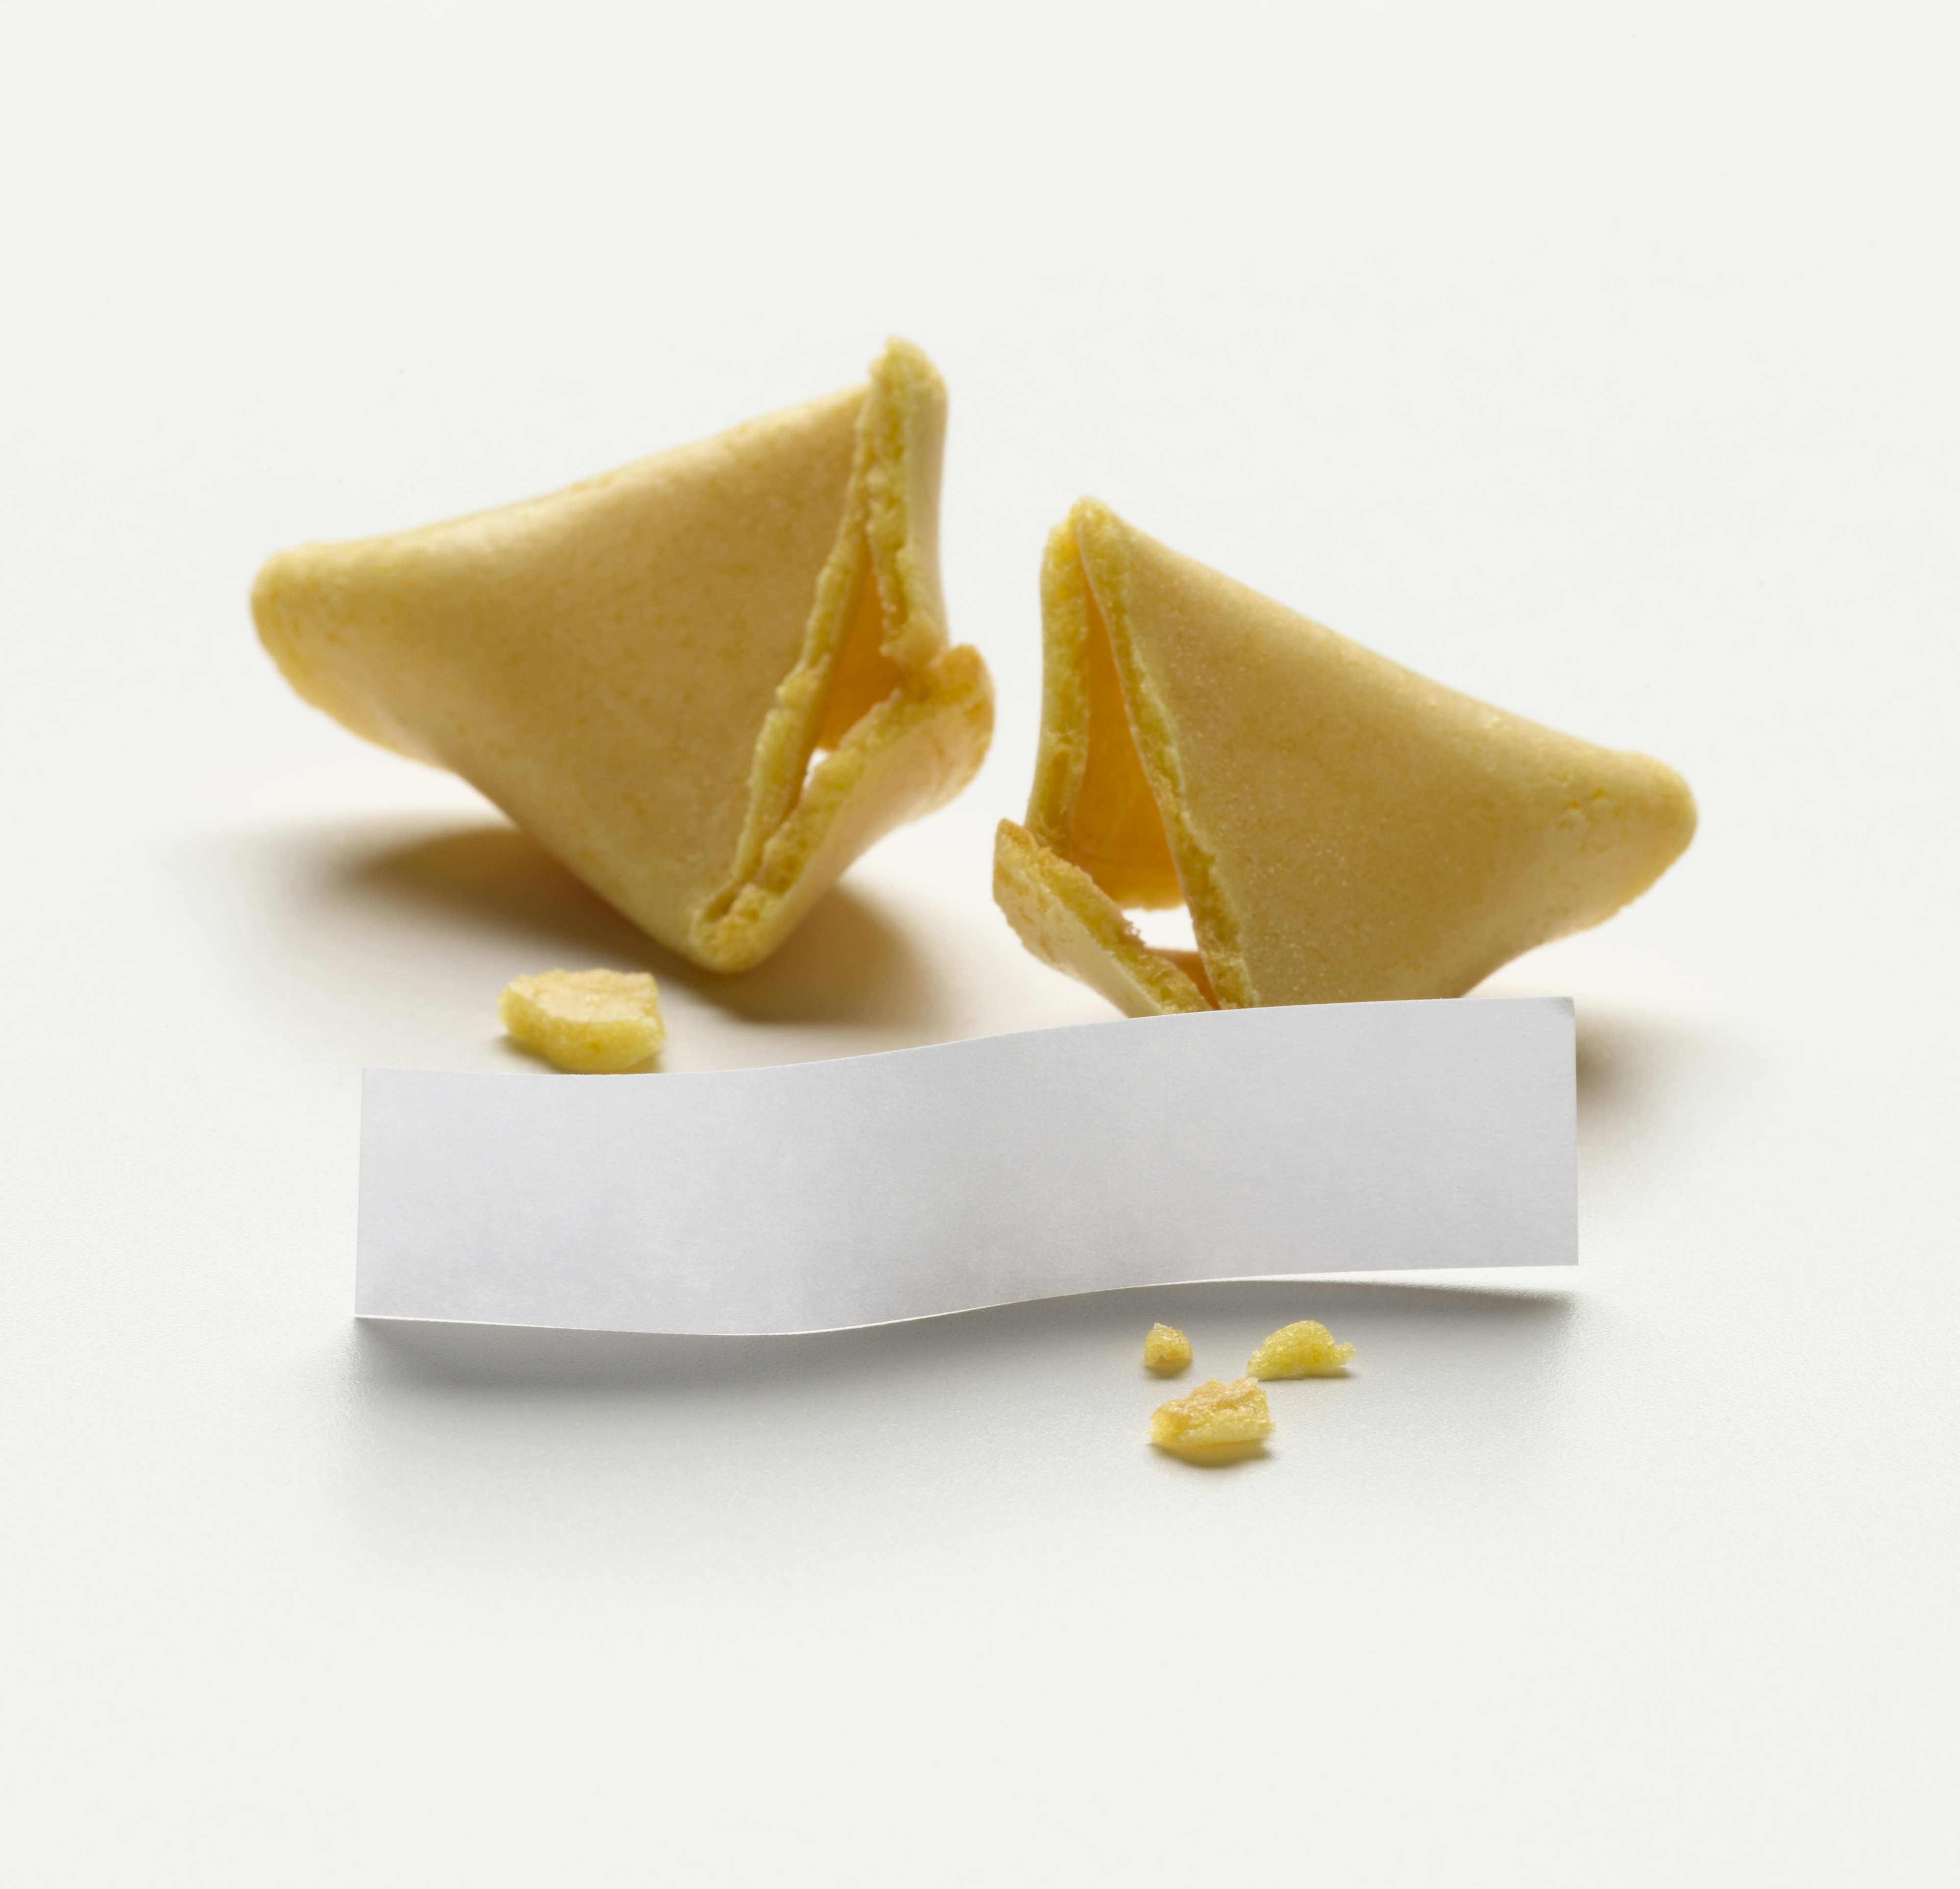 A broken fortune cookie with the visible paper fortune on a white background